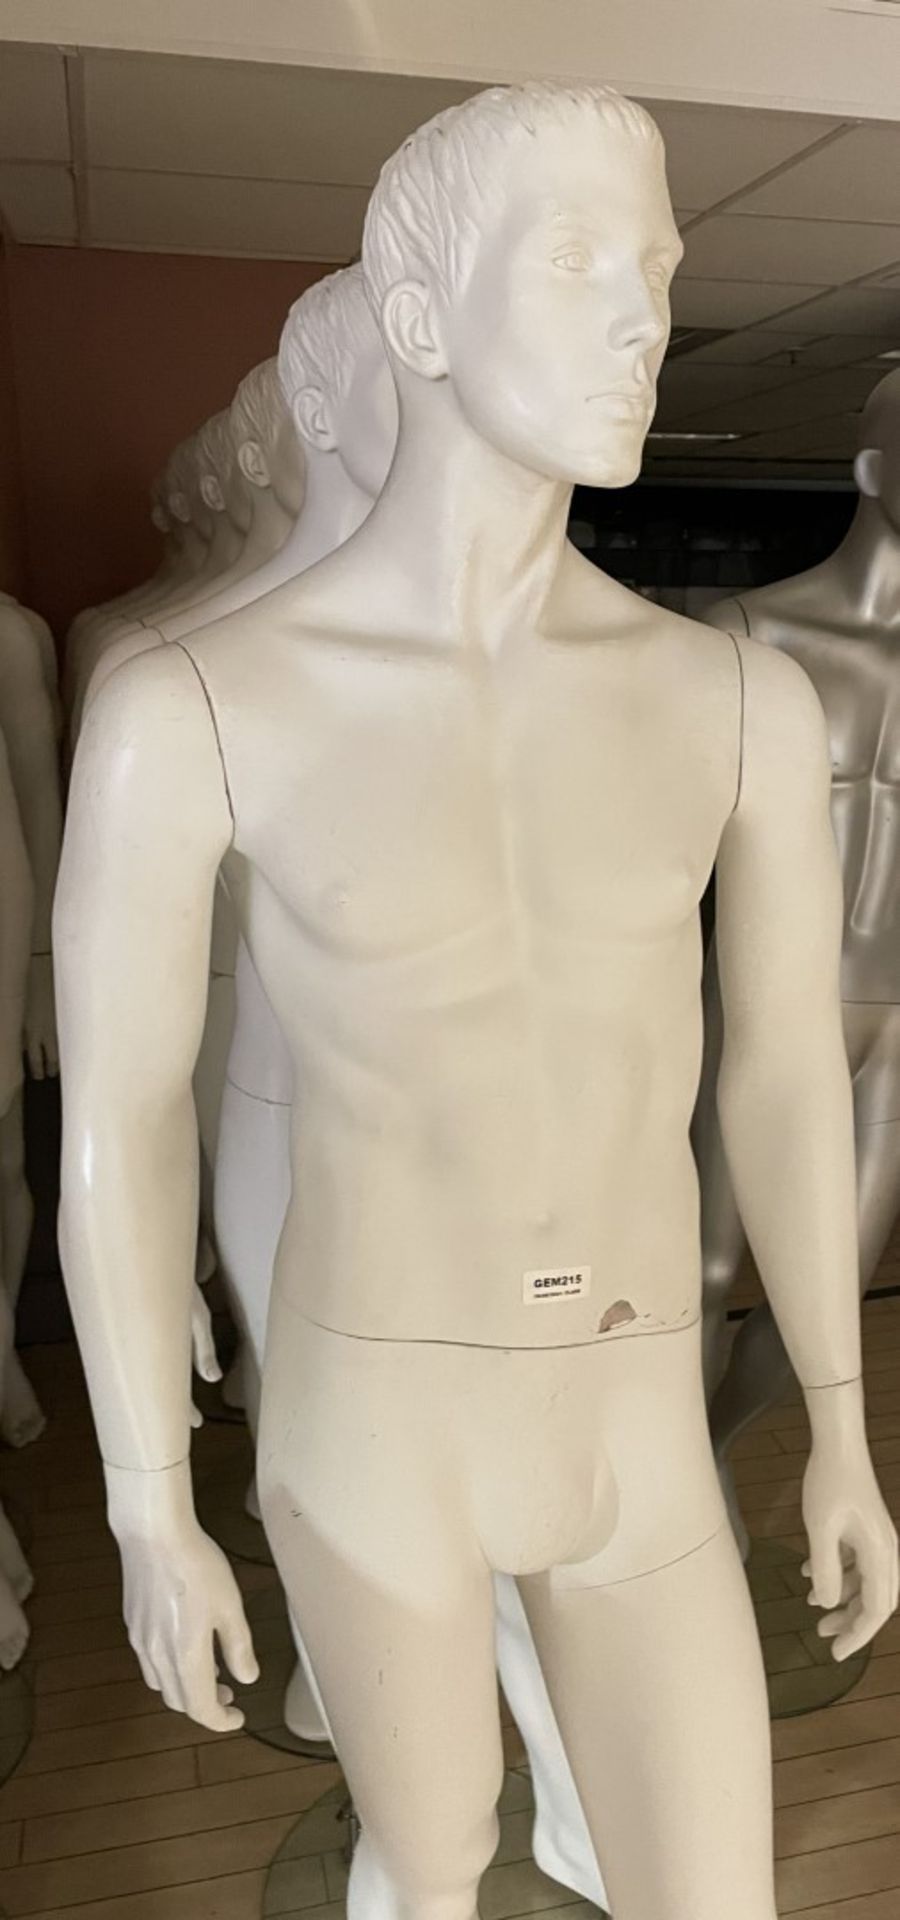 9 x Full Size Male Mannequins on Stands - CL670 - Ref: GEM215/216 - Location: Gravesend, DA11 - Image 3 of 5